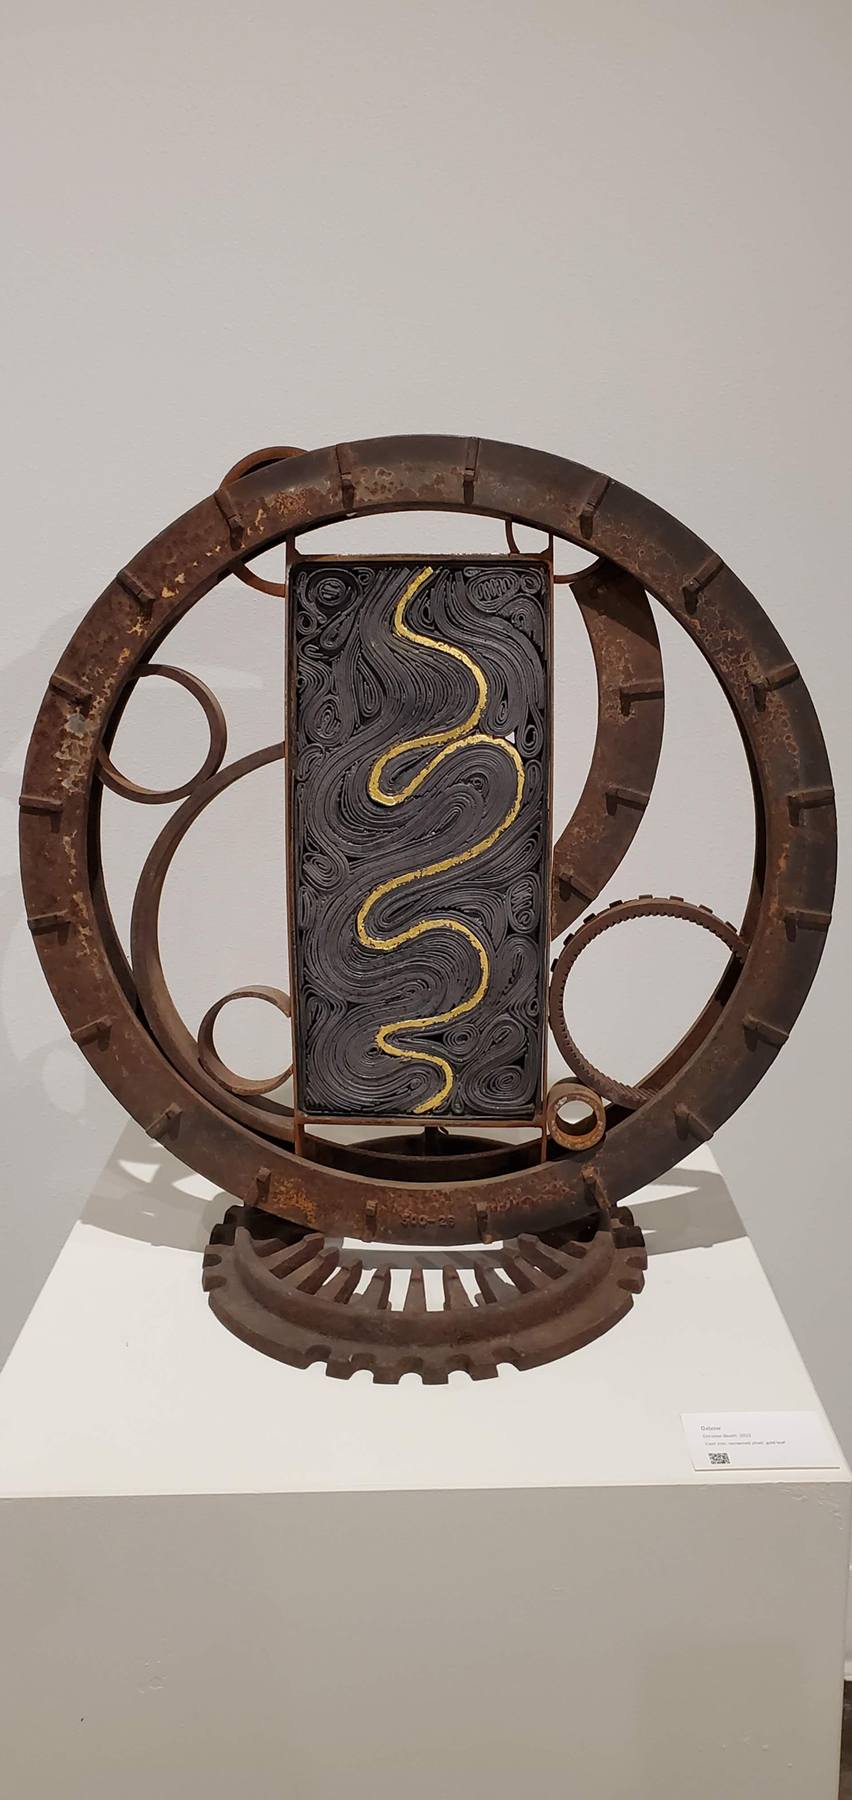 A winding topographic plate with winding gold leaf inside a steel whwwl, image courtesy of the artist